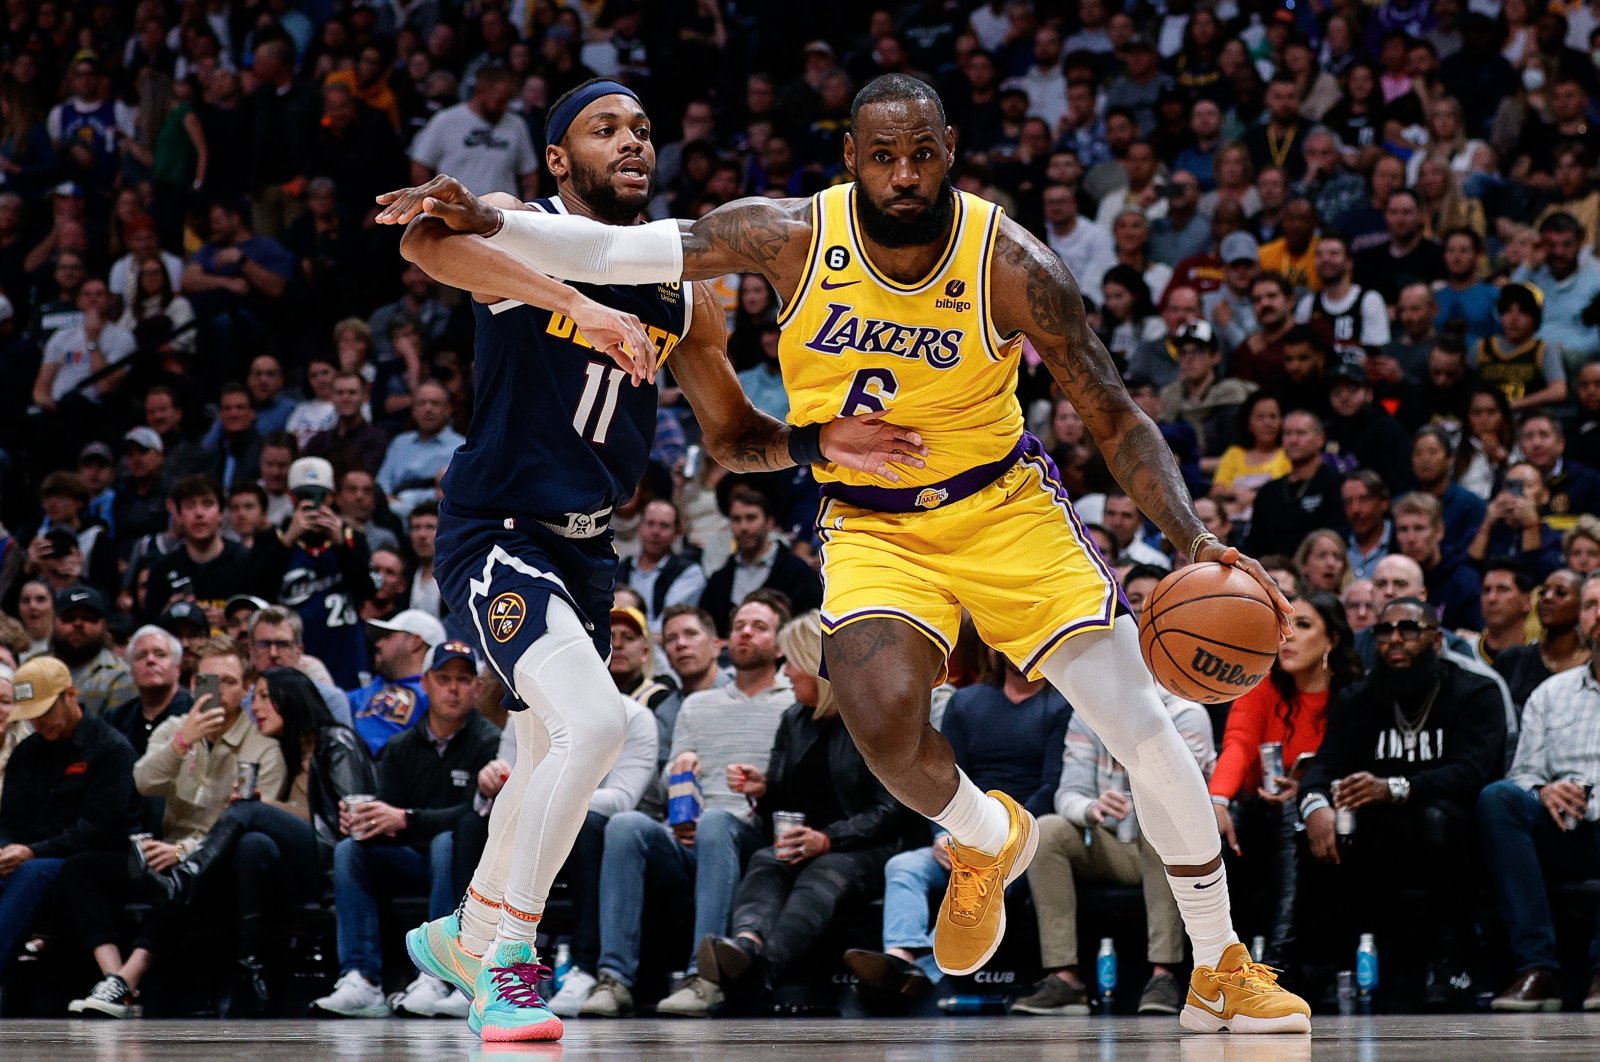 Los Angeles Lakers forward LeBron James (6) controls the ball as Denver Nuggets forward Bruce Brown (11) guards in the second quarter at Ball Arena, Denver, Colorado, U.S., Oct 26, 2022. (Reuters Photo)